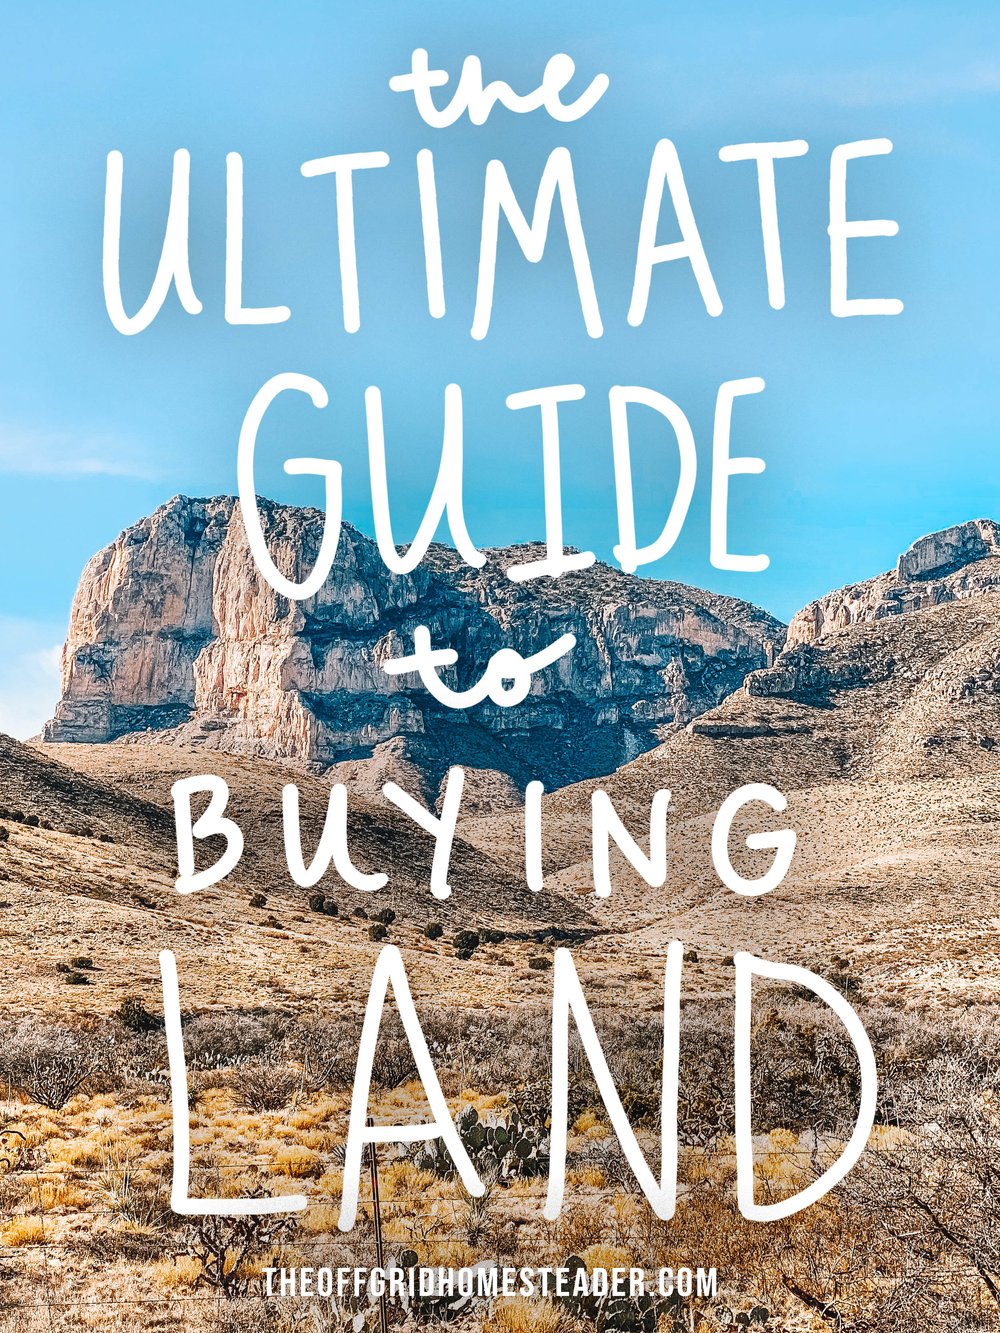 The Ultimate Guide To Buying Land.jpg